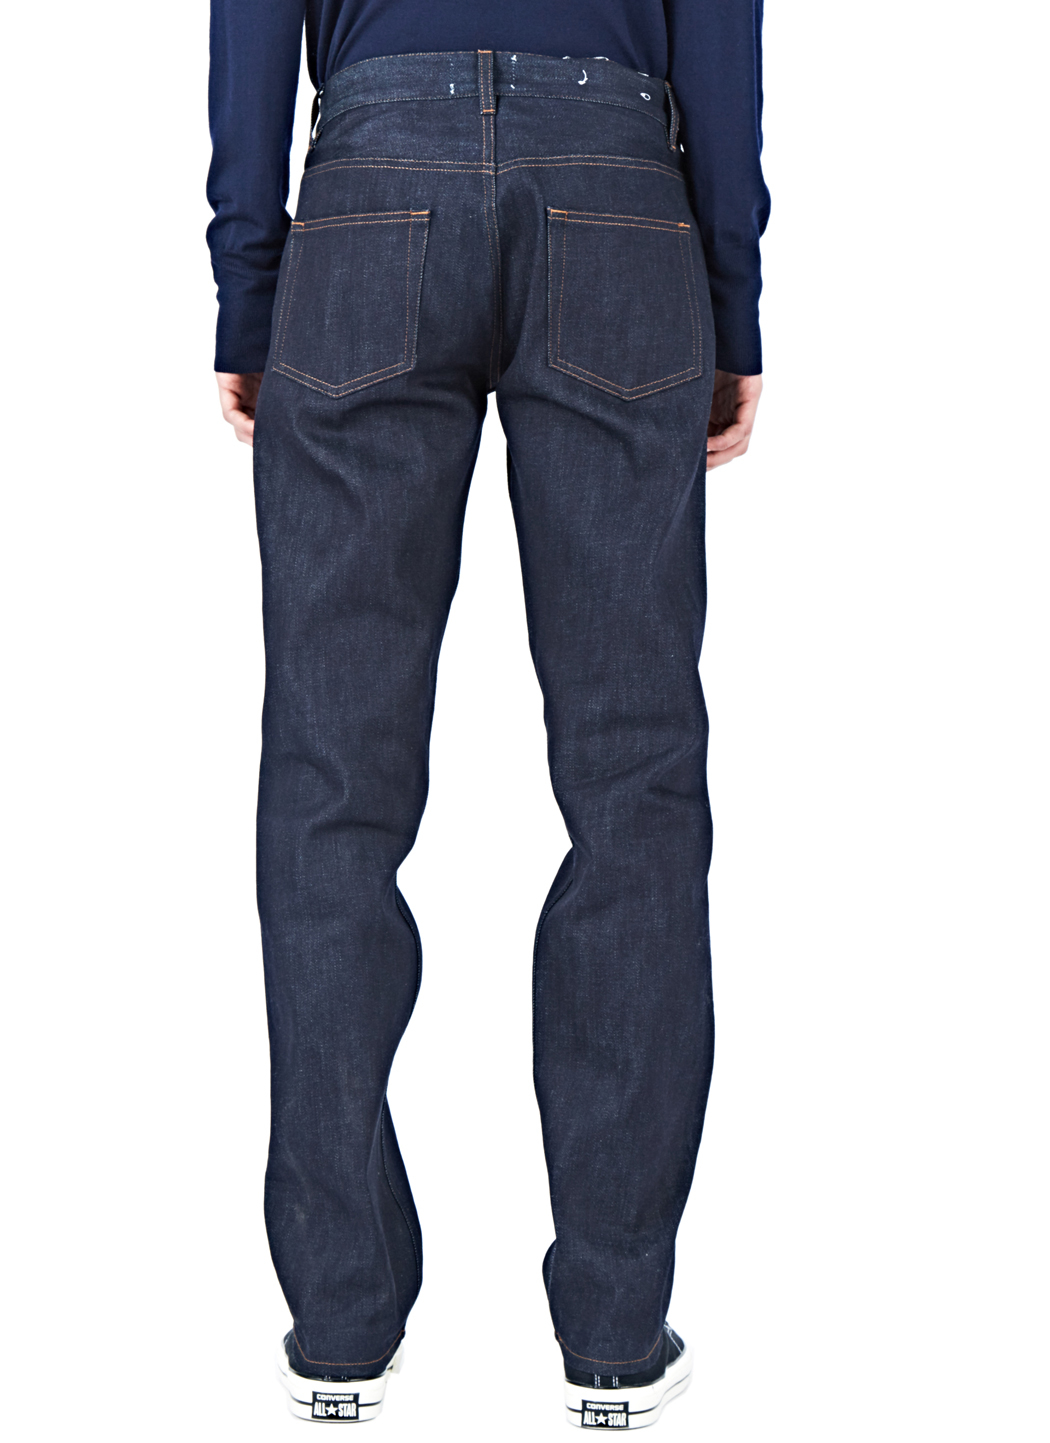 Lyst - Acne Studios Ash Raw Jeans in Blue for Men